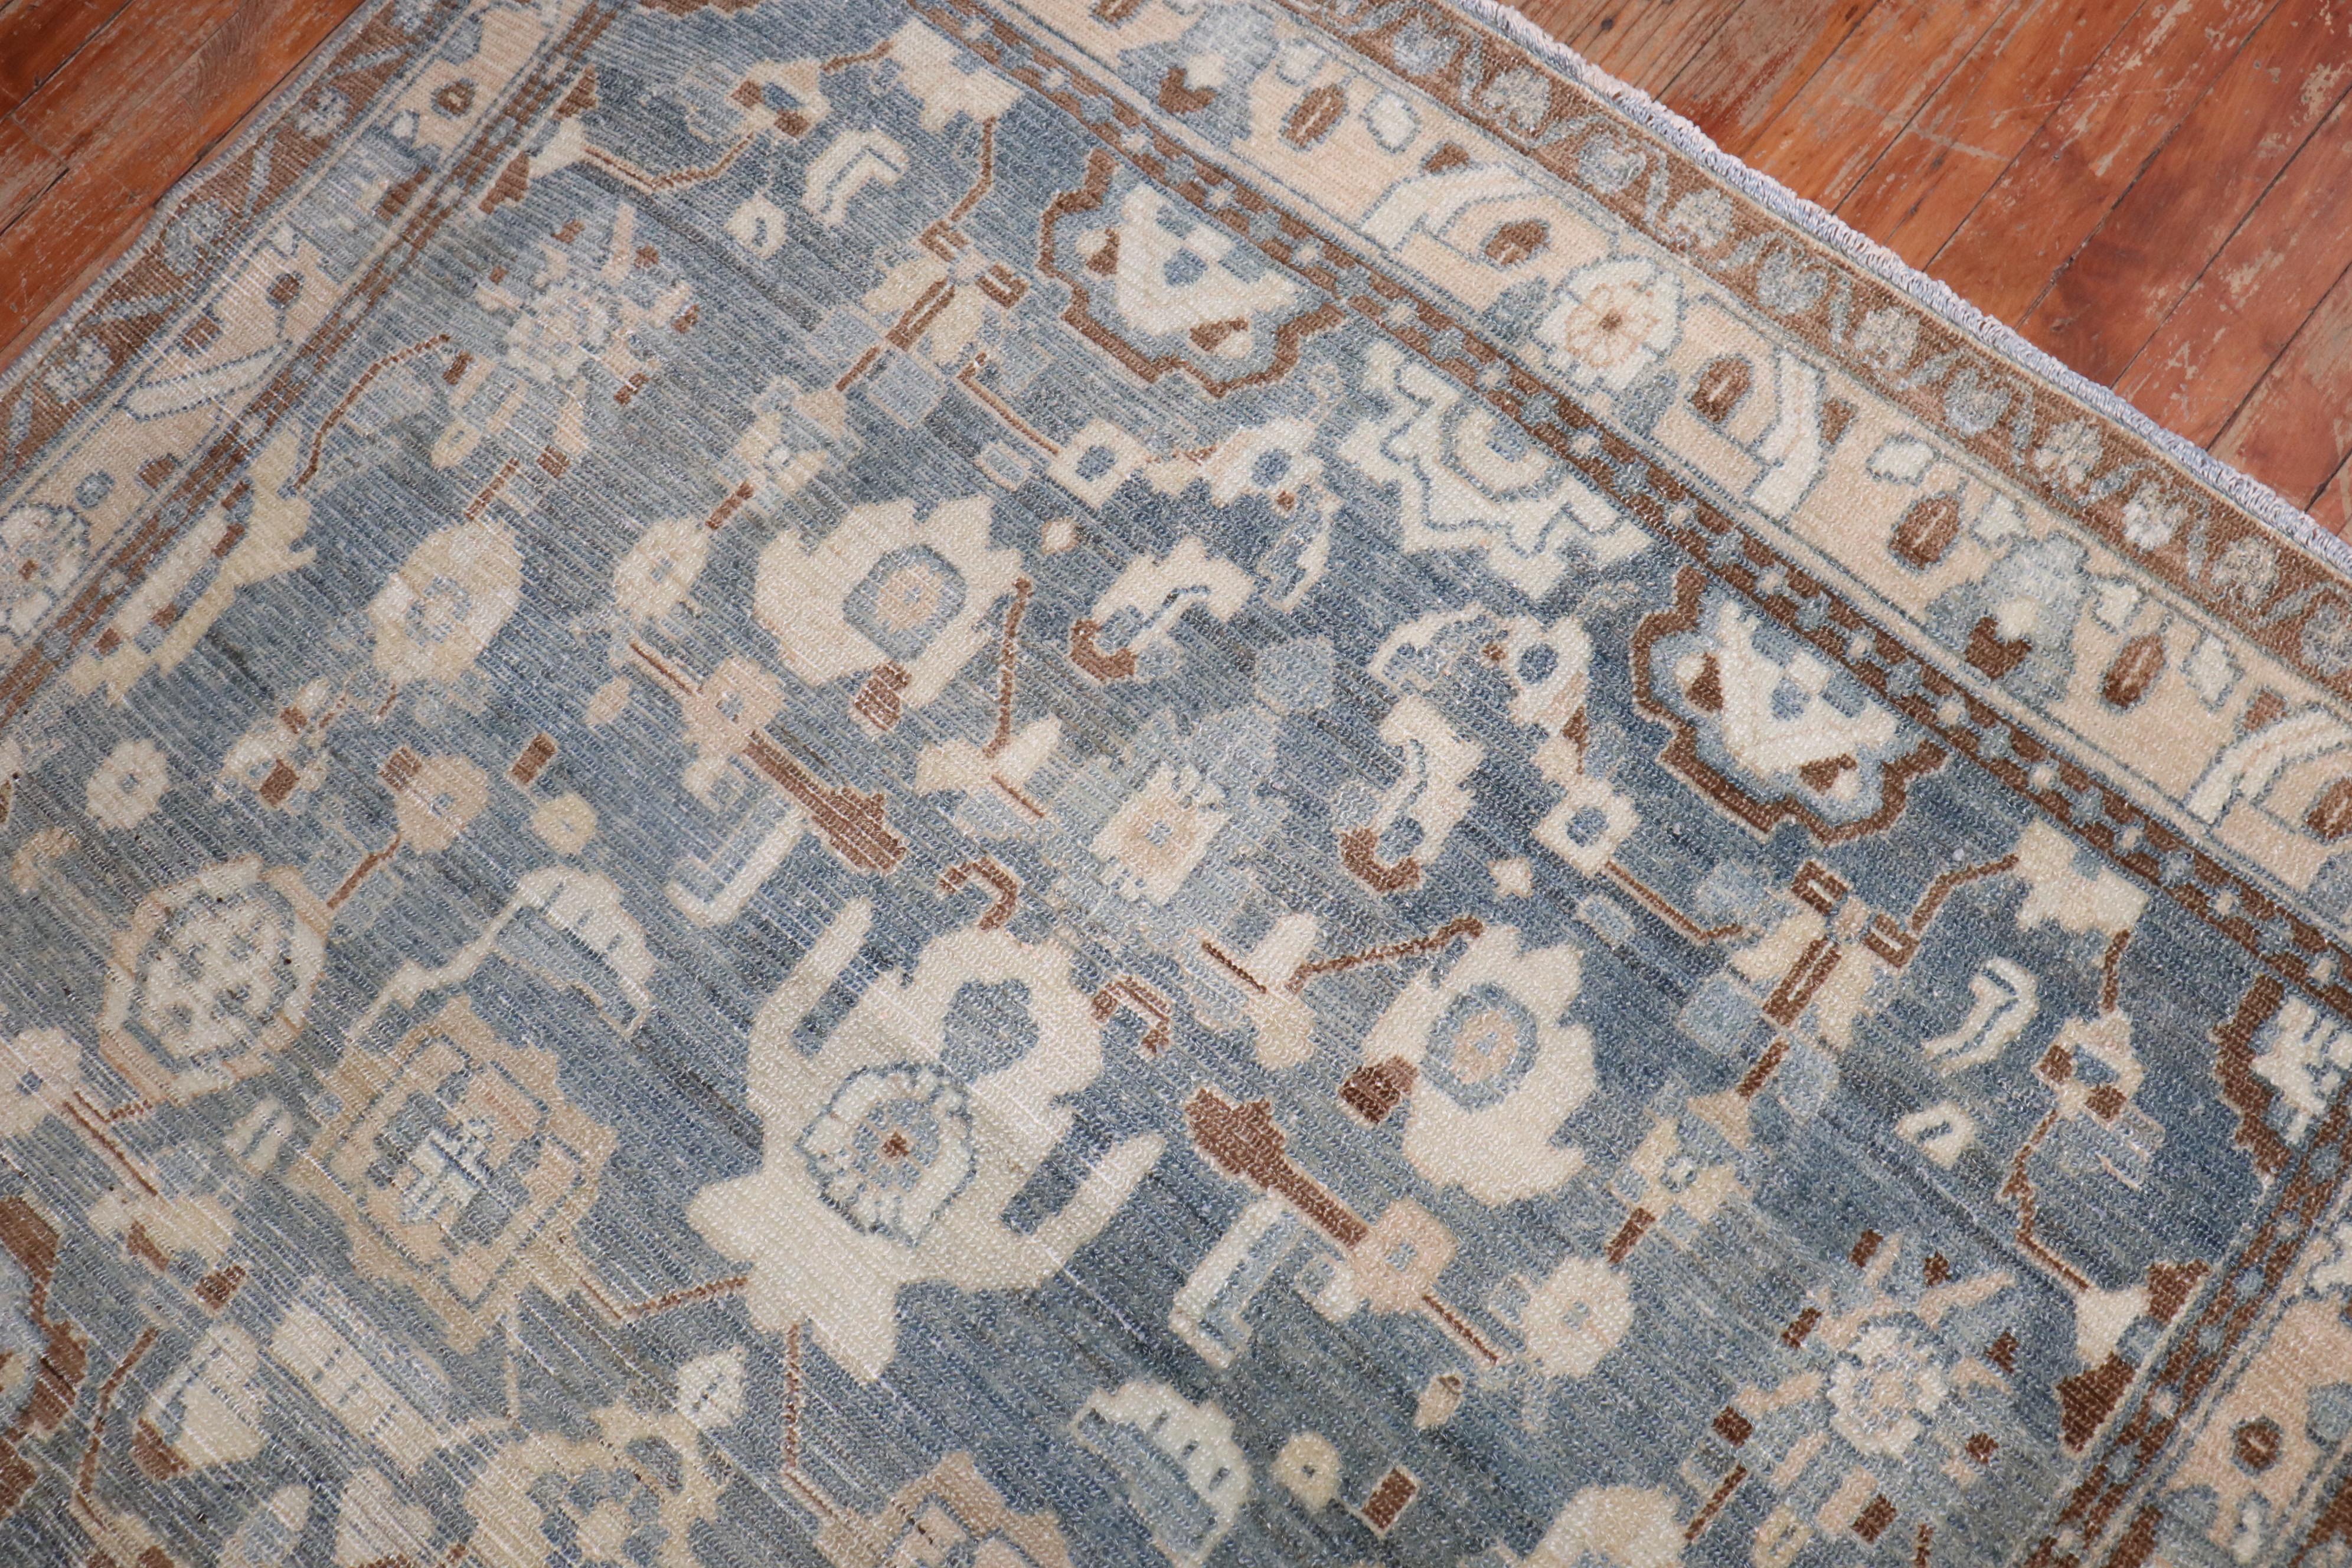 Persian Malayer Accent Rug in earth tones from the 2nd quarter of the 20th century

Details
rug no.	j3186
size	4' 6